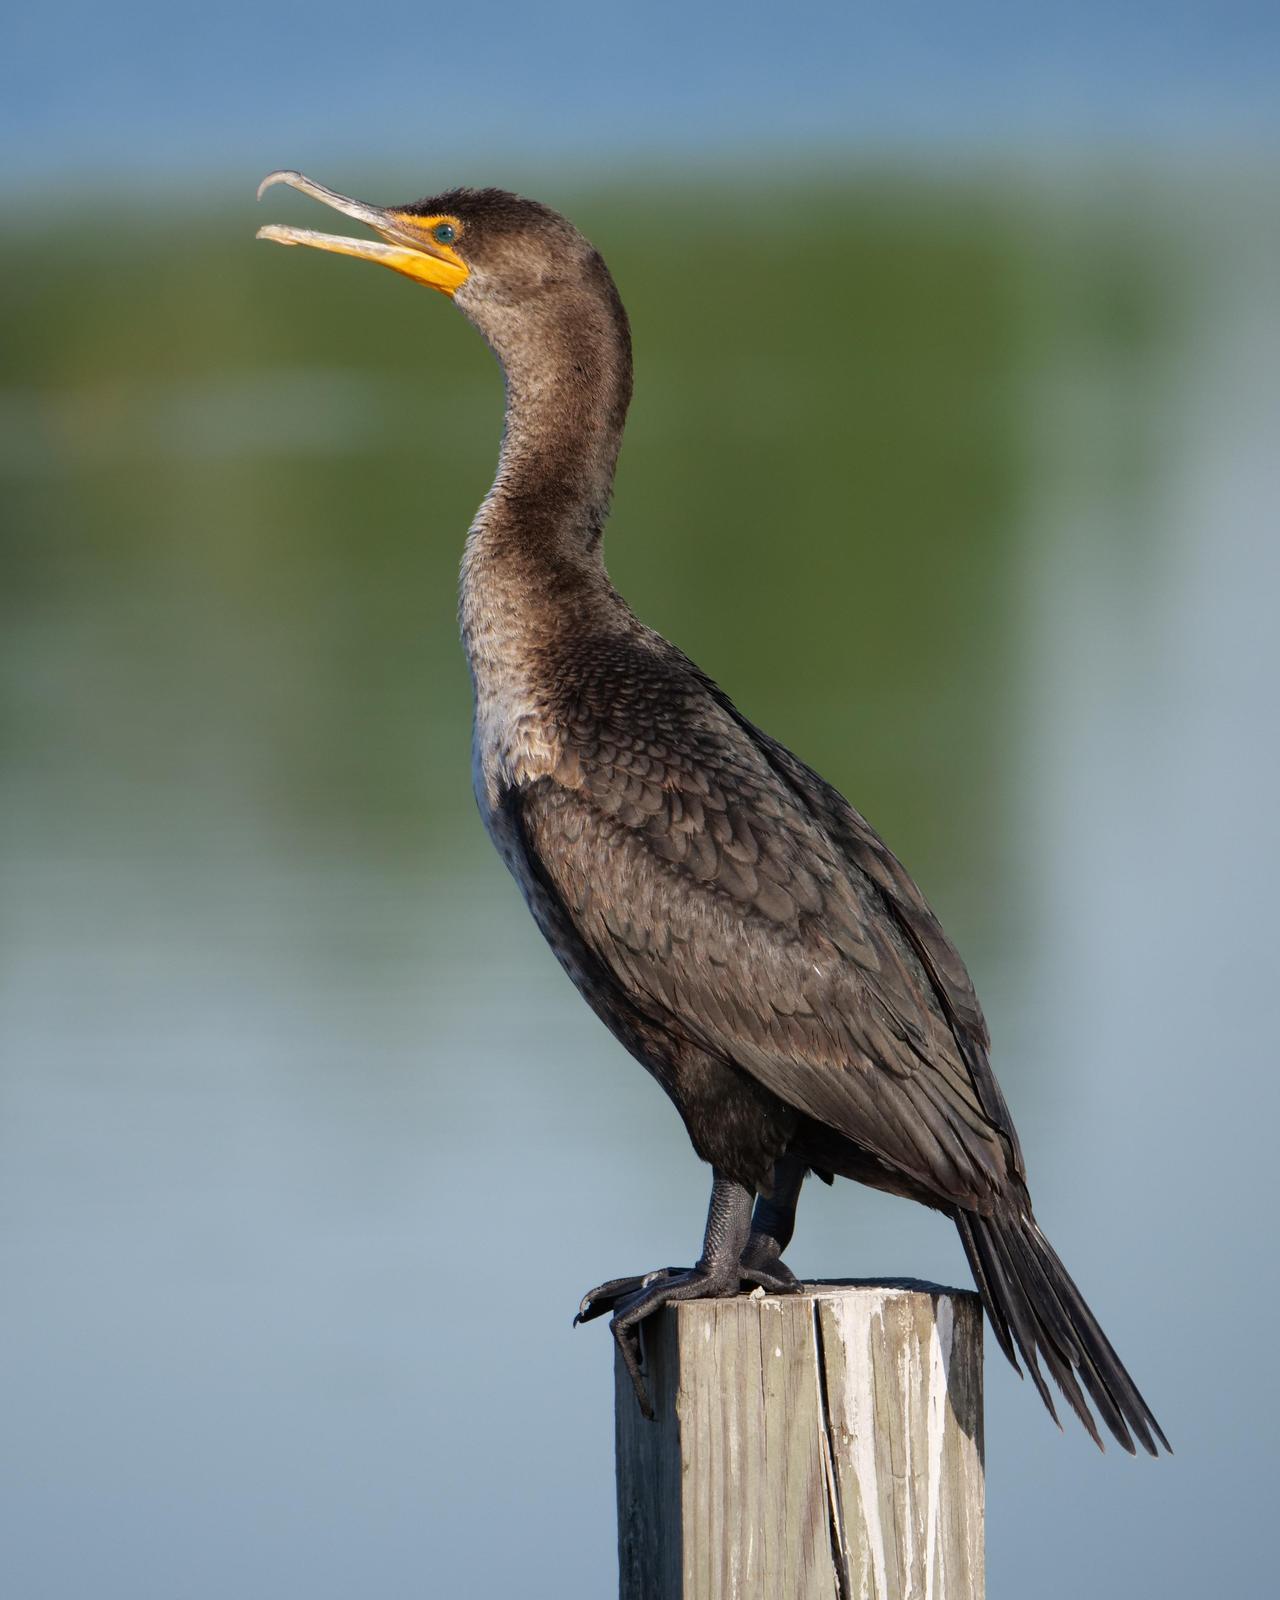 Double-crested Cormorant Photo by Steve Percival